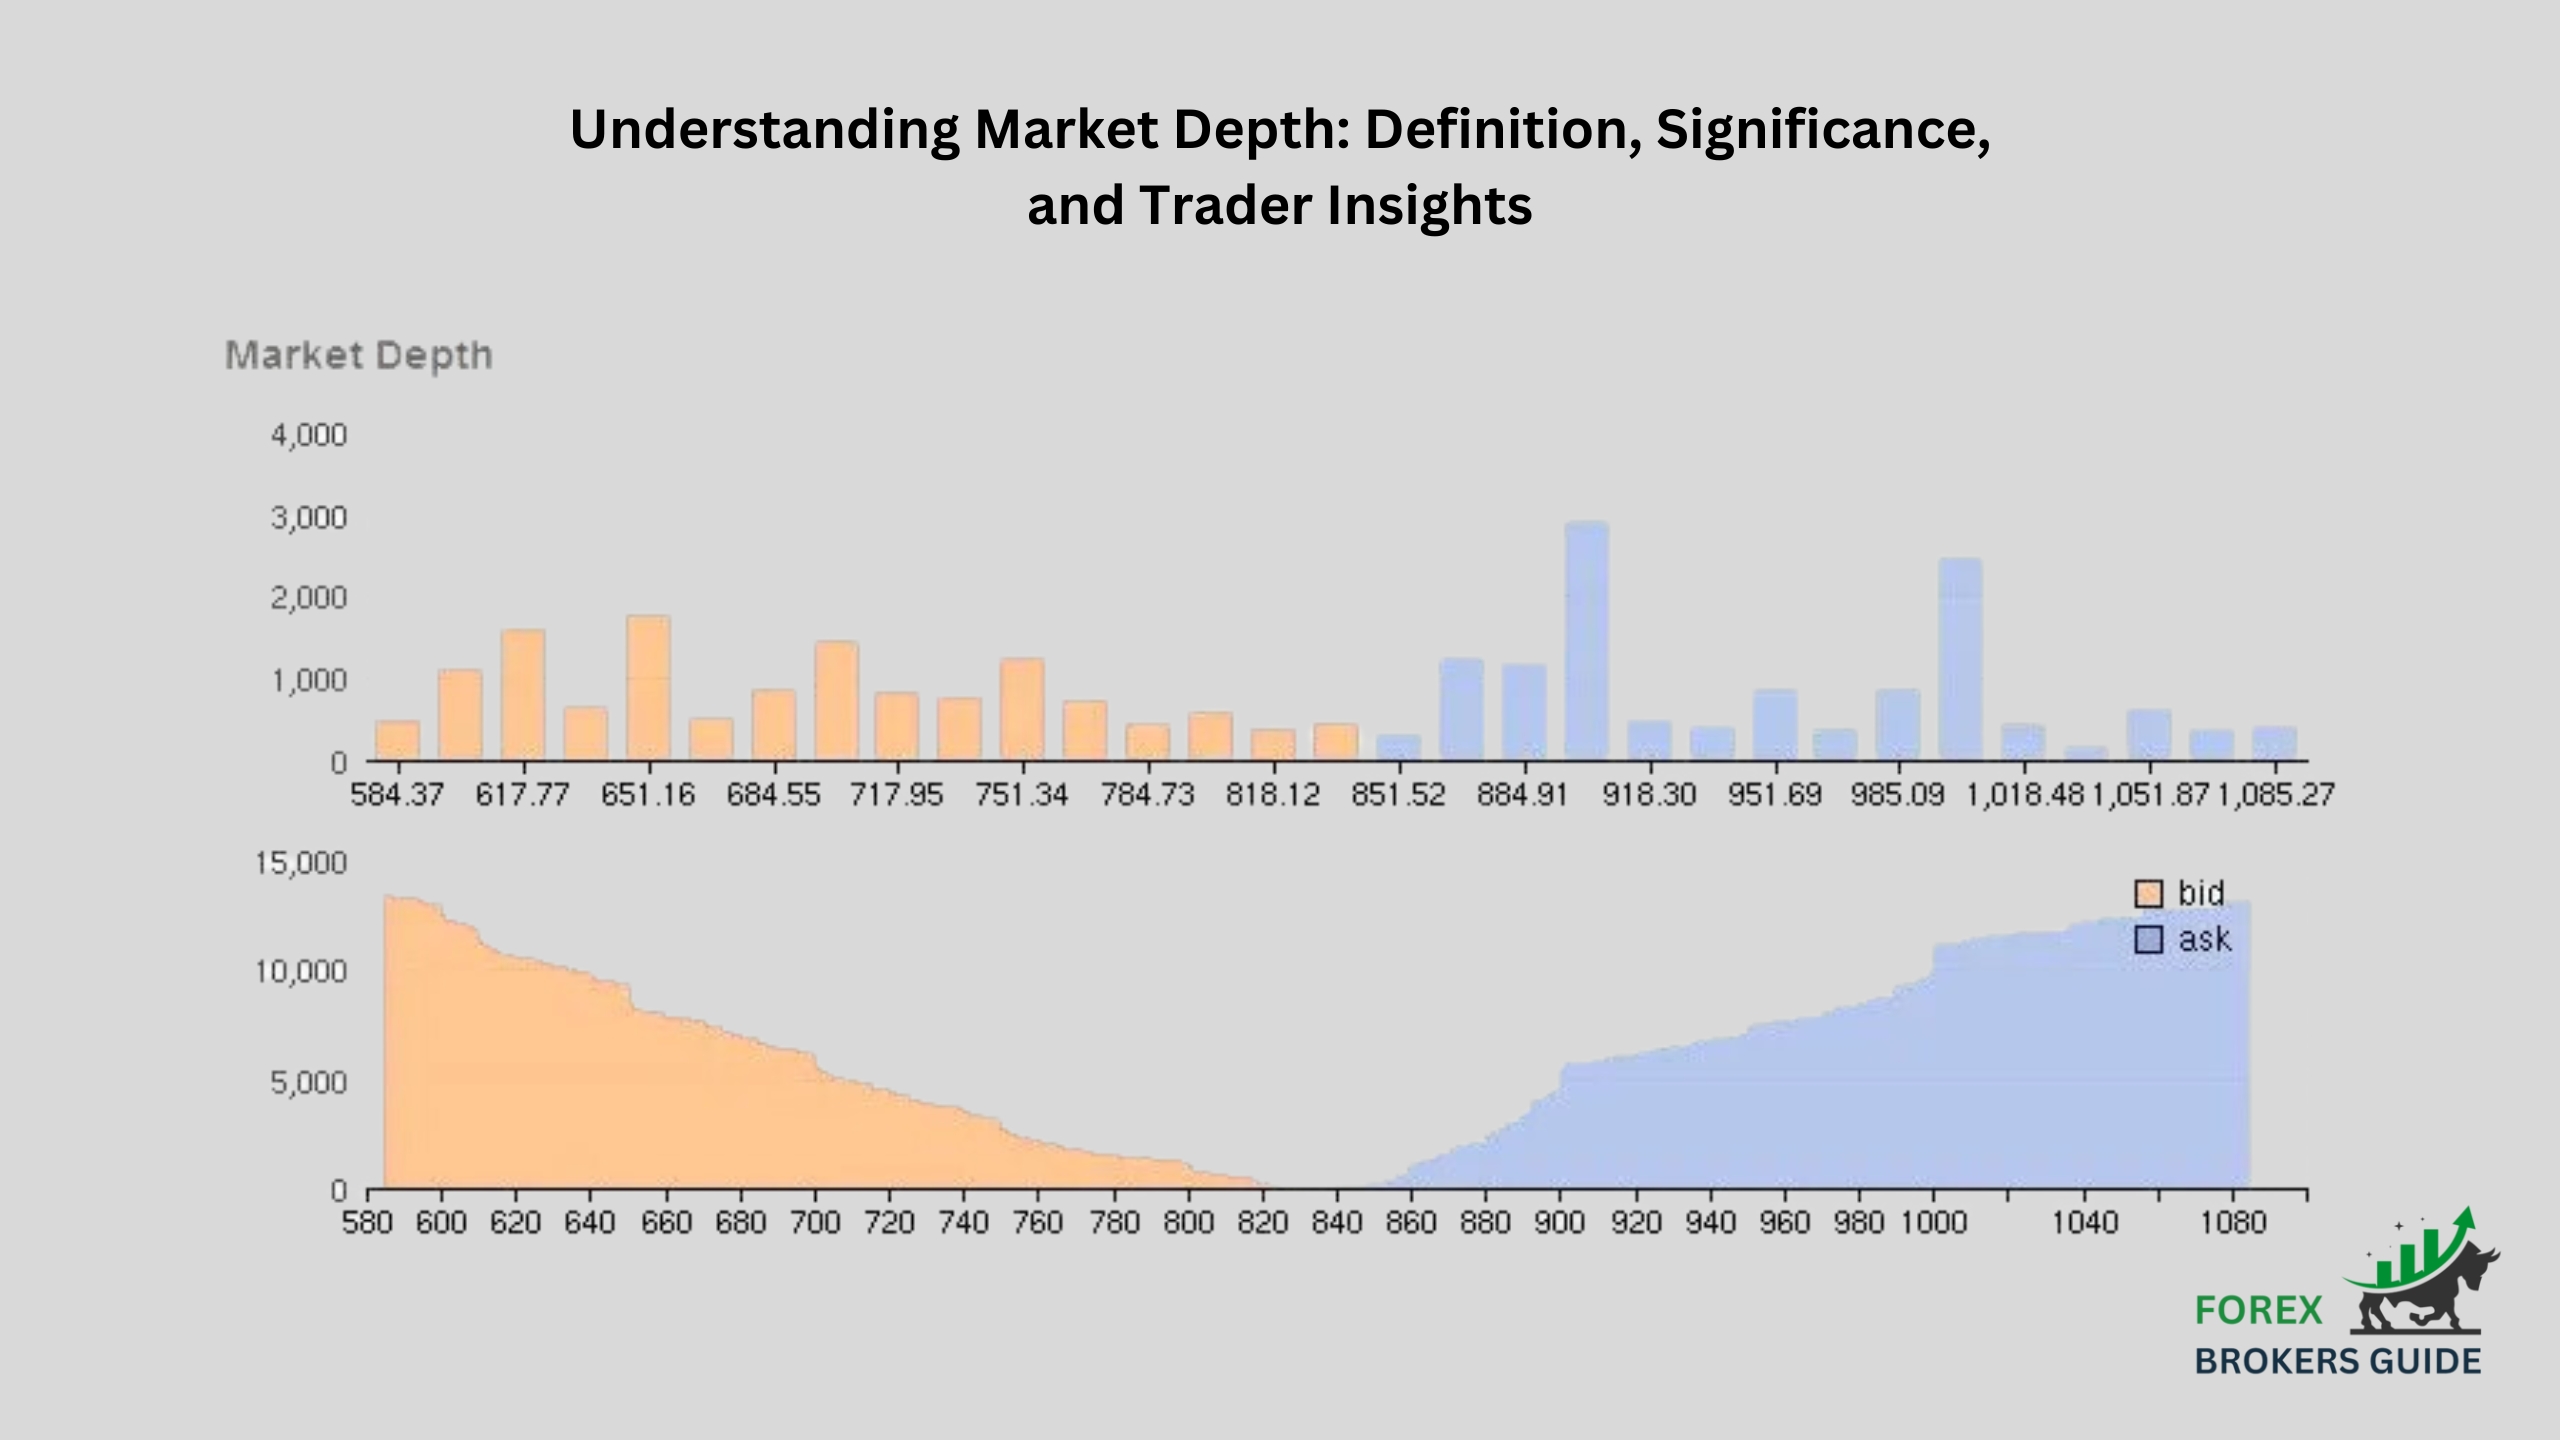 Understanding Market Depth Definition, Significance, and Trader Insights